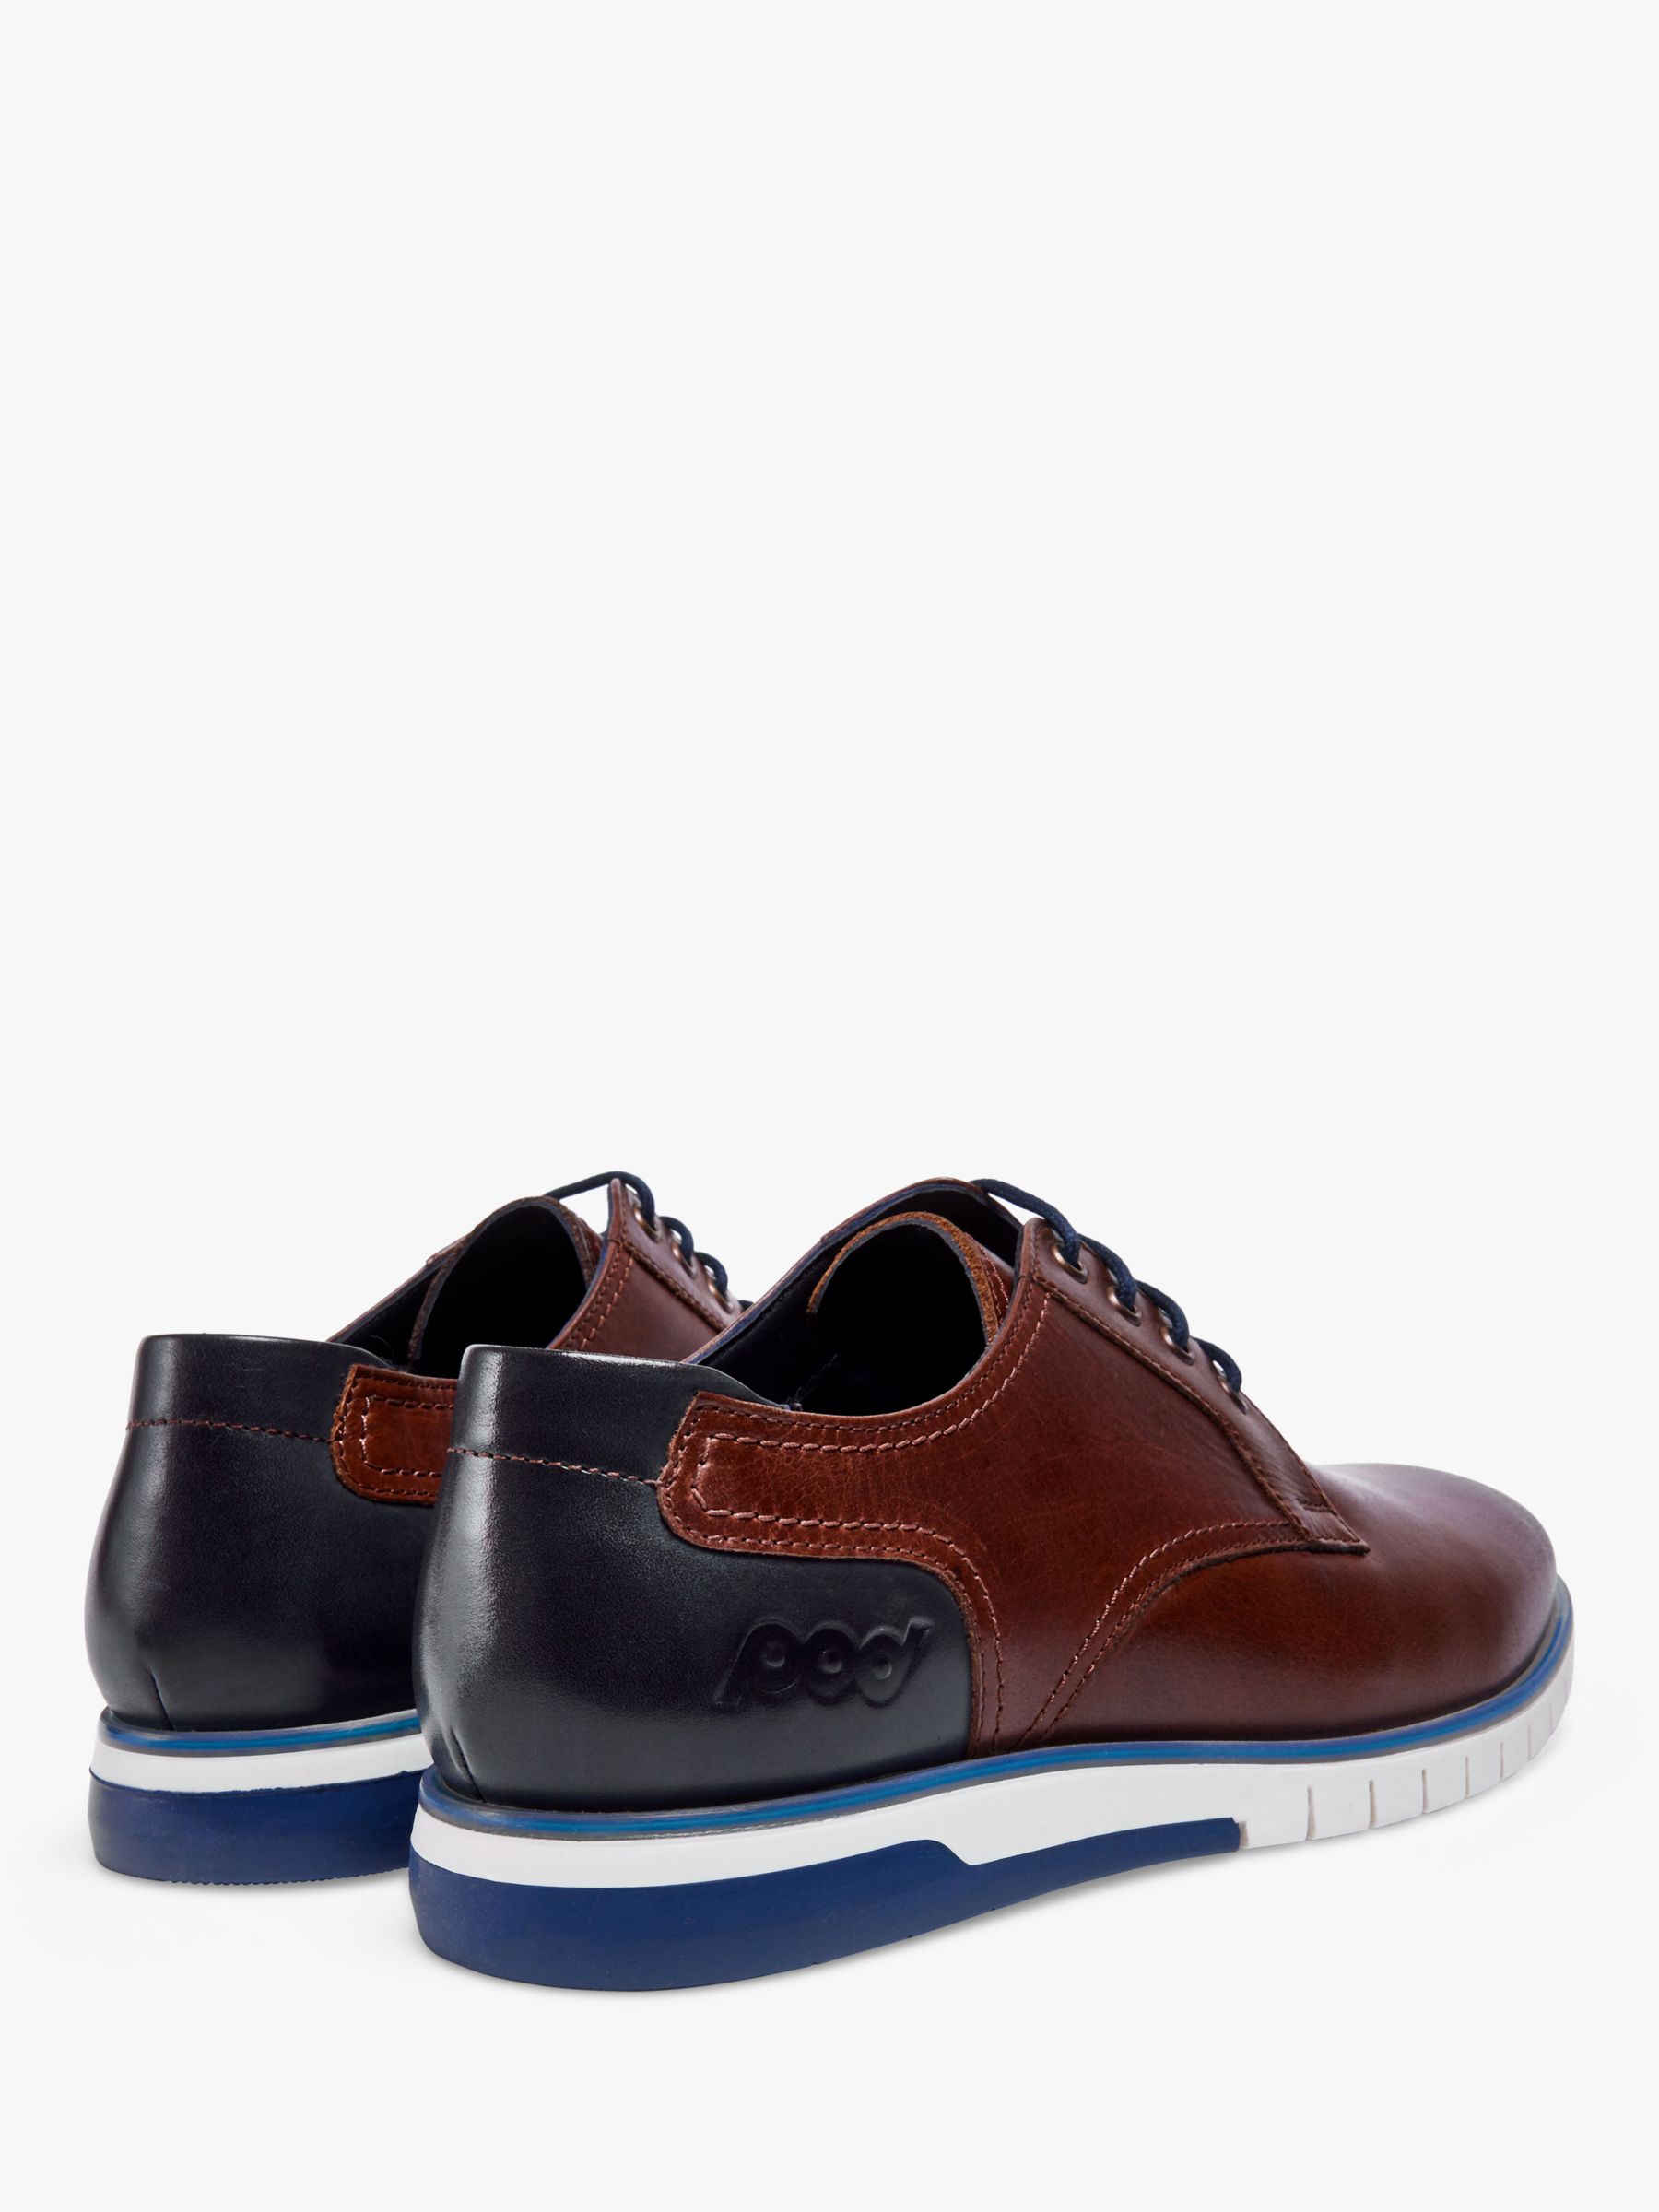 Pod Cillian Casual Leather Shoe, Brown at John Lewis & Partners